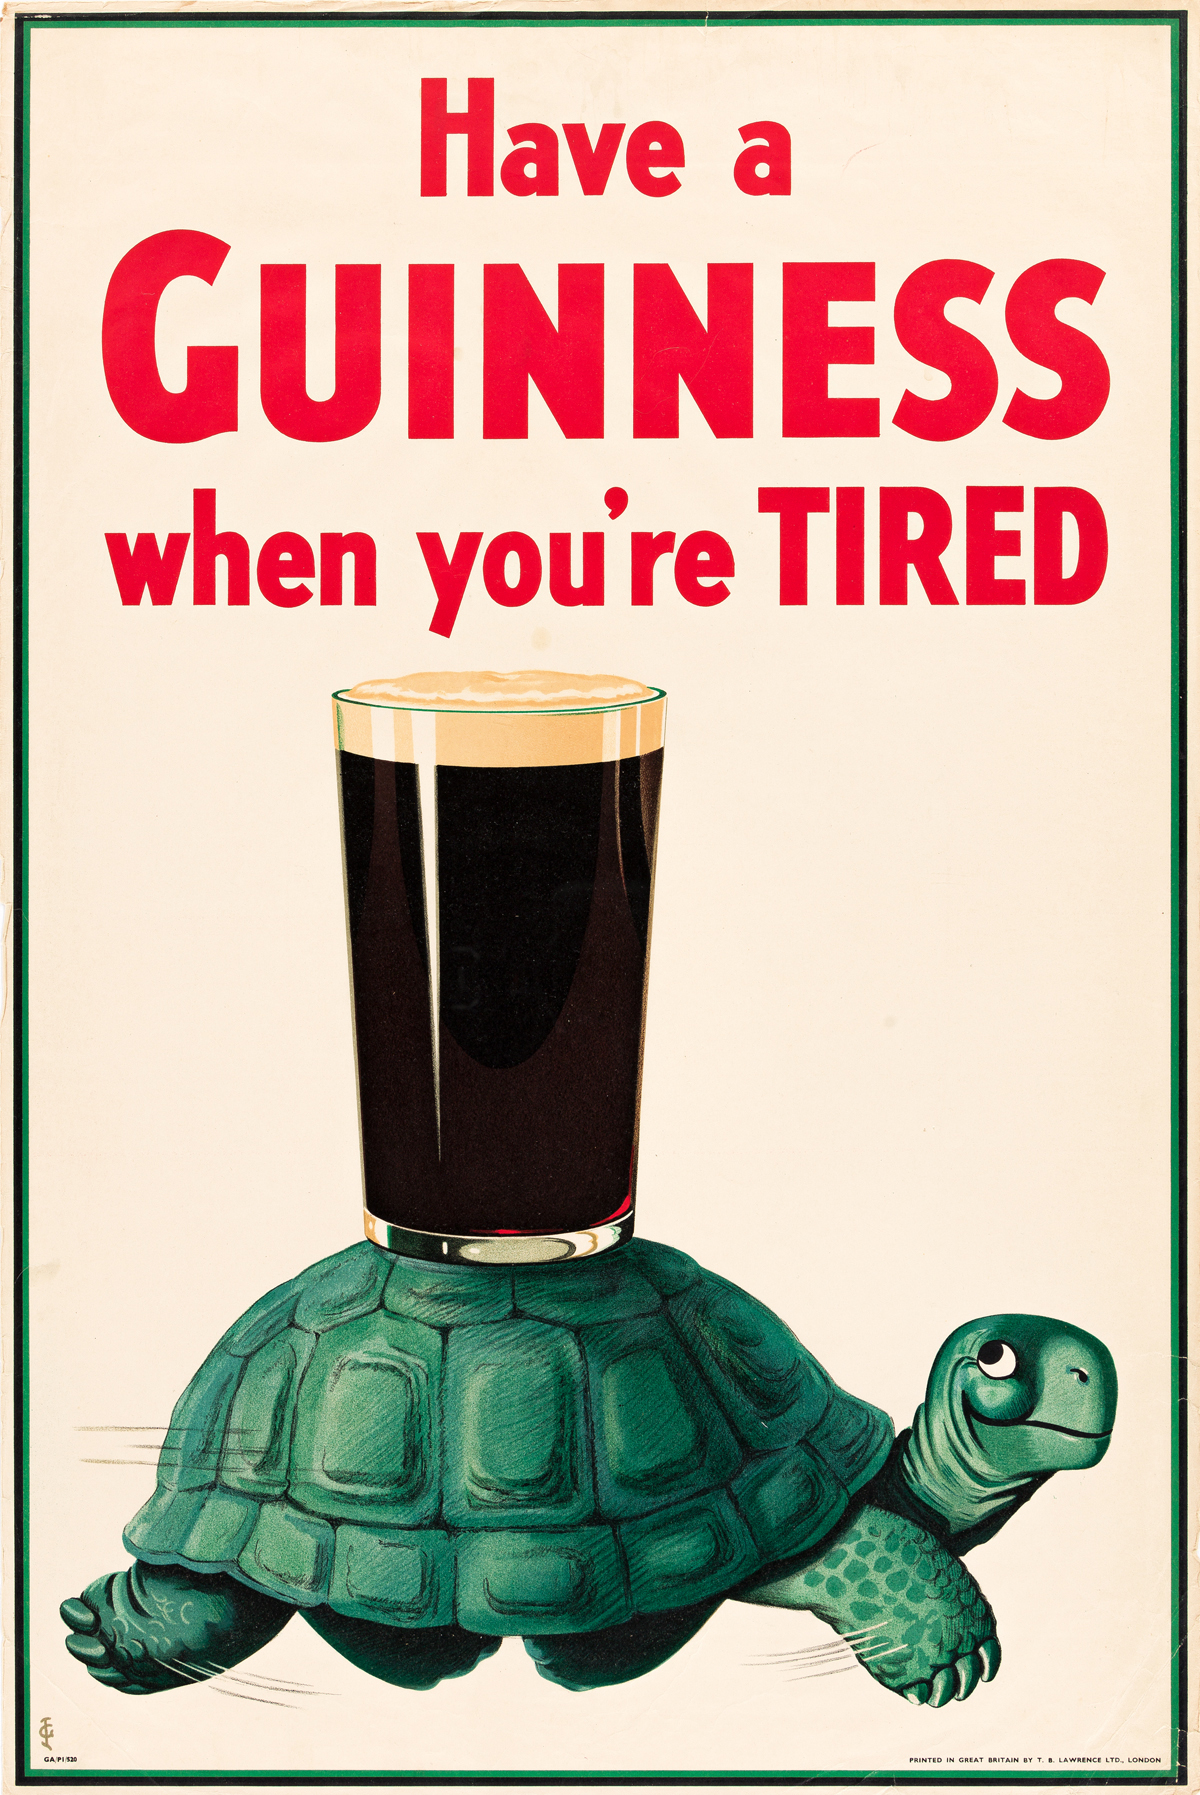 JOHN GILROY (1898-1985).  HAVE A GUINNESS WHEN YOURE TIRED. 1936. 30x20 inches, 76x50 cm. T.B. Lawrence Ltd., London.